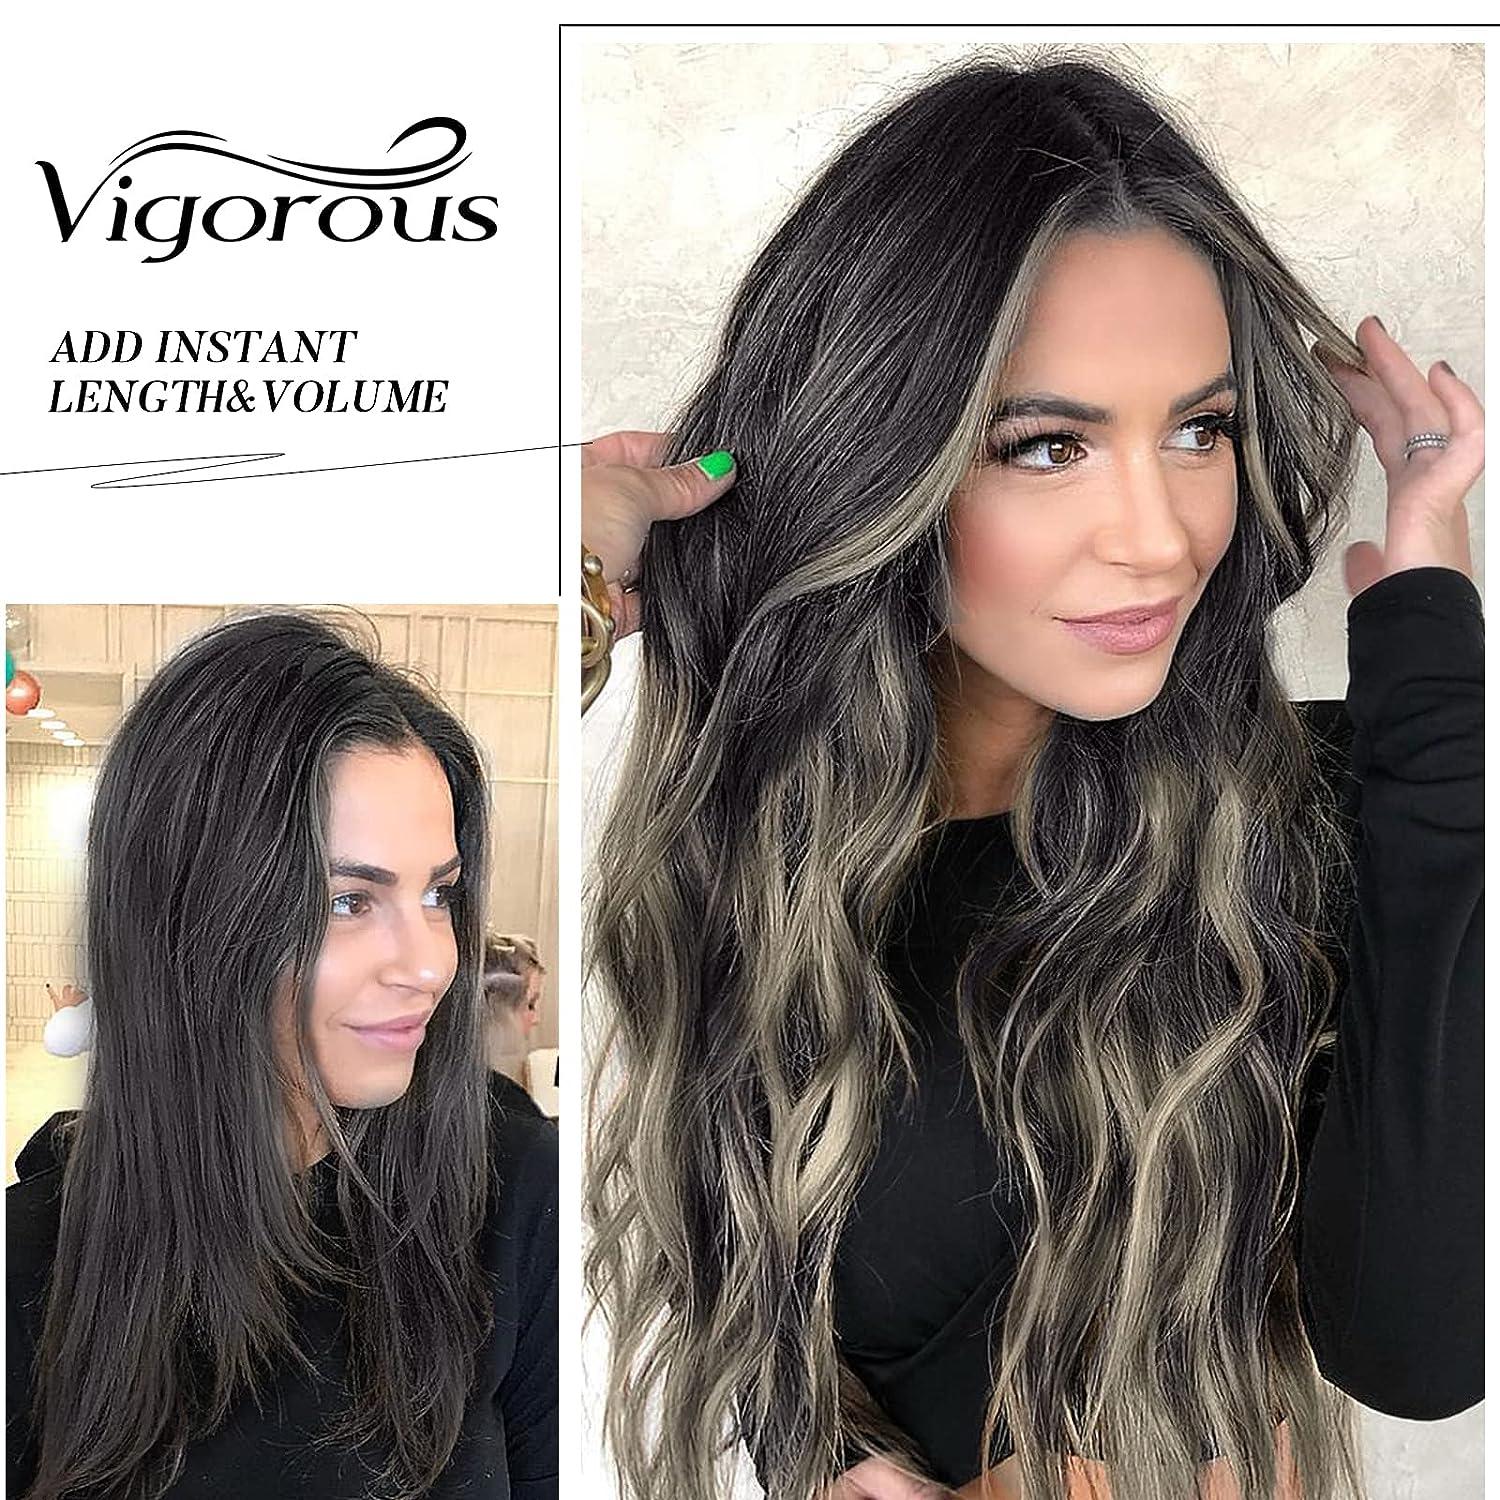 Vigorous Wavy Hair Extension Black Mix Blonde Long Clip in Hair Extensions  Soft Synthetic Hairpieces for Women